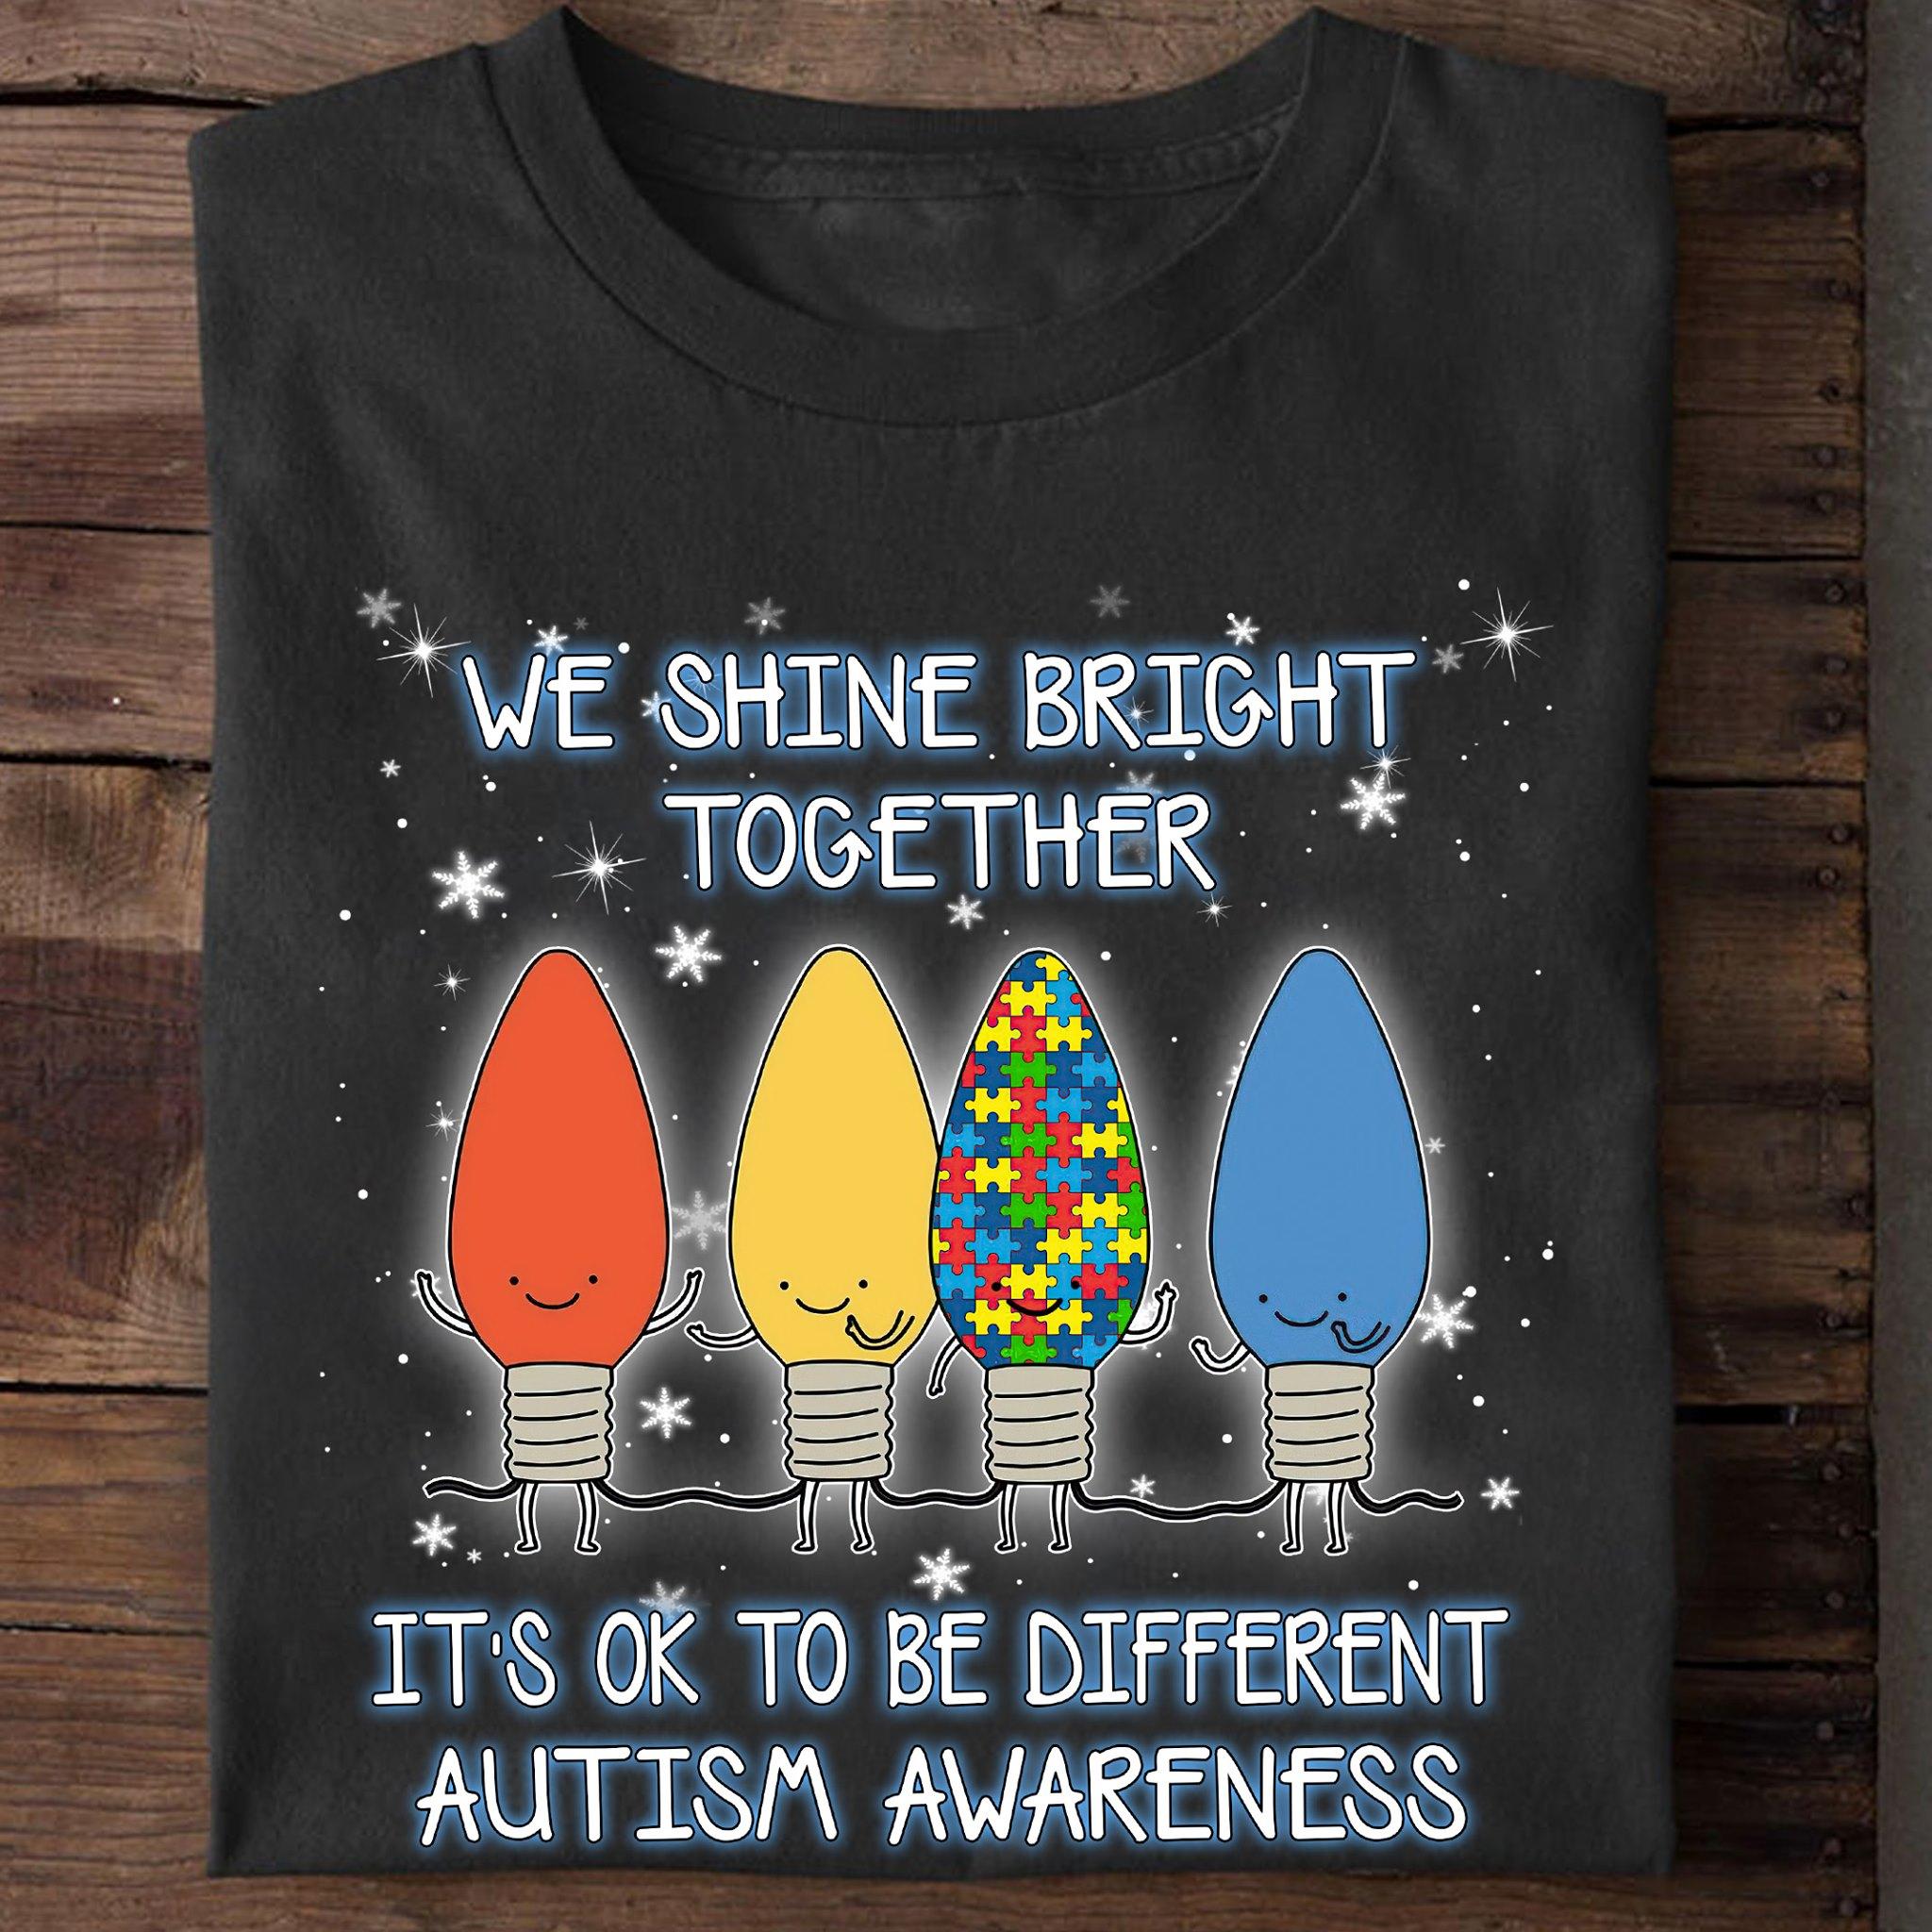 We shine bright together - It's ok to be different, Autism awareness, light bulb autism